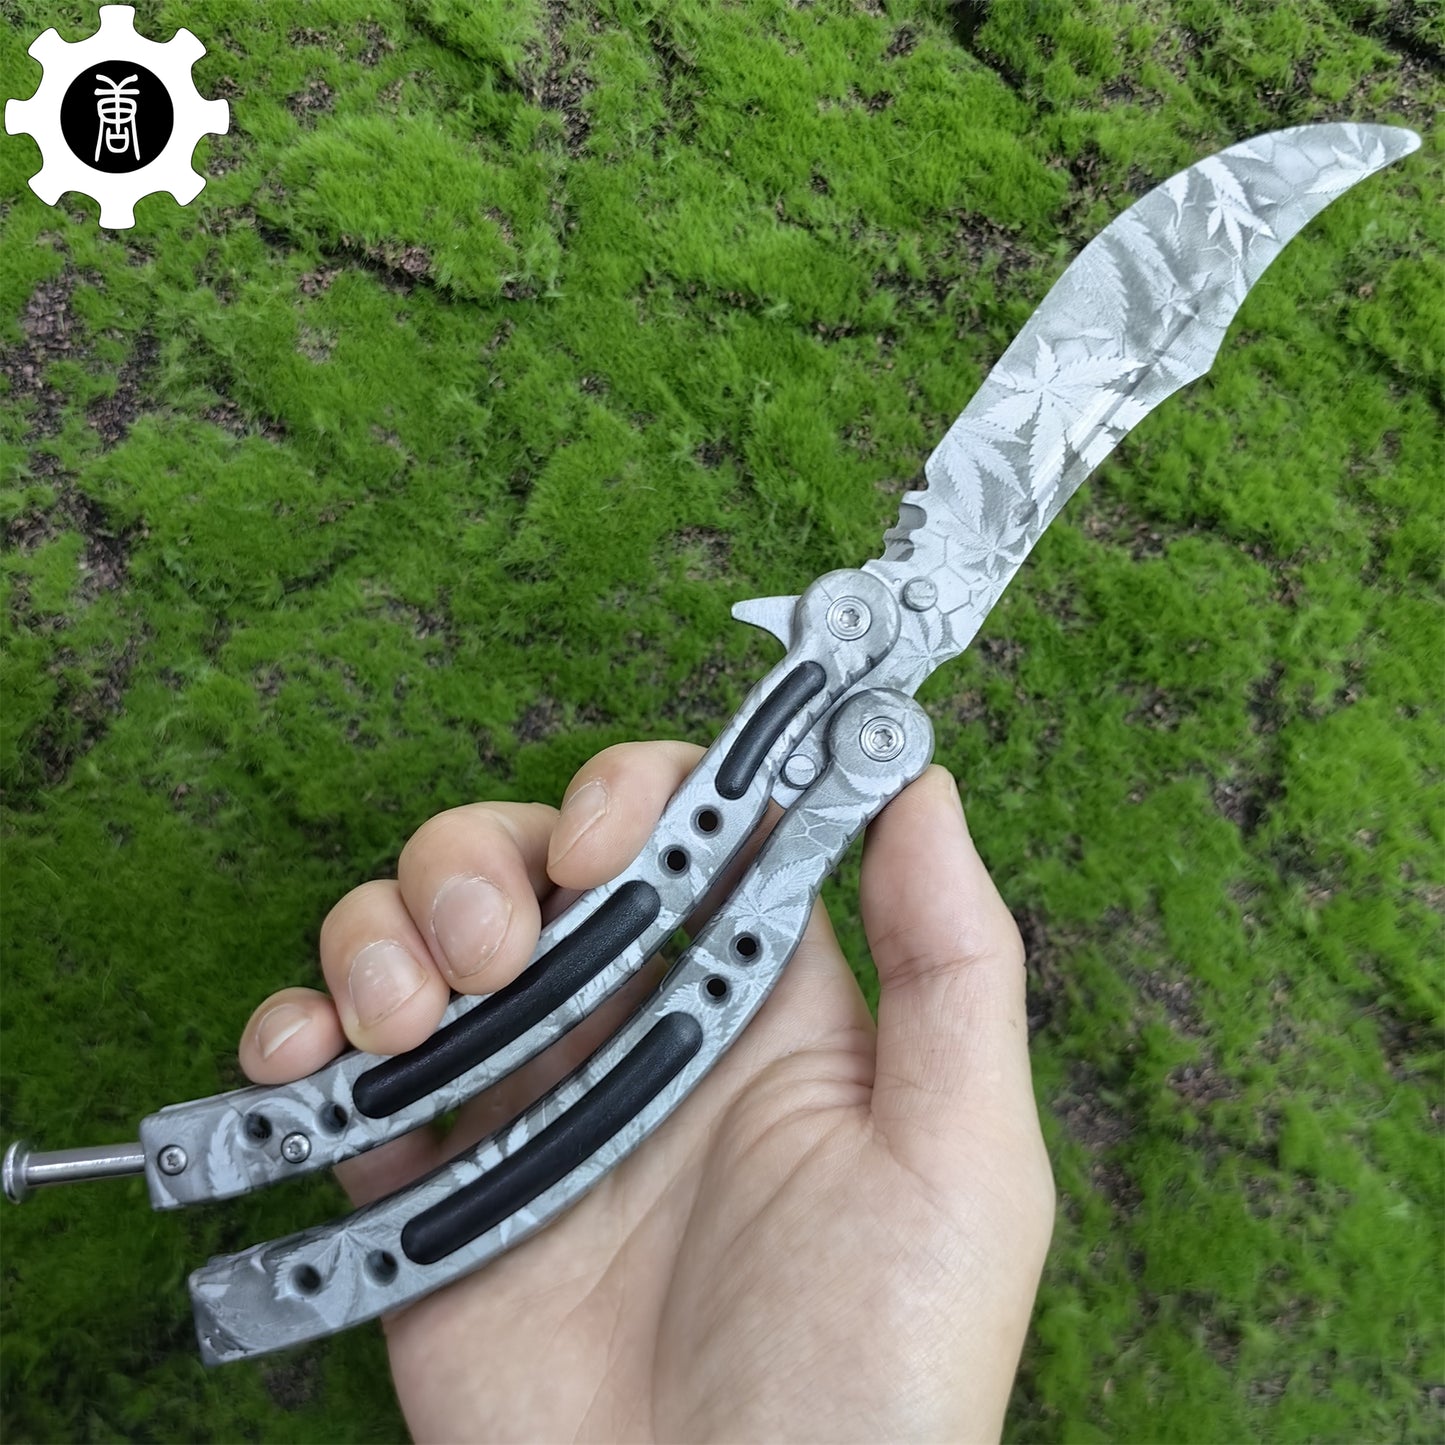 Game Butterfly Knife Maple Leaf Balisong